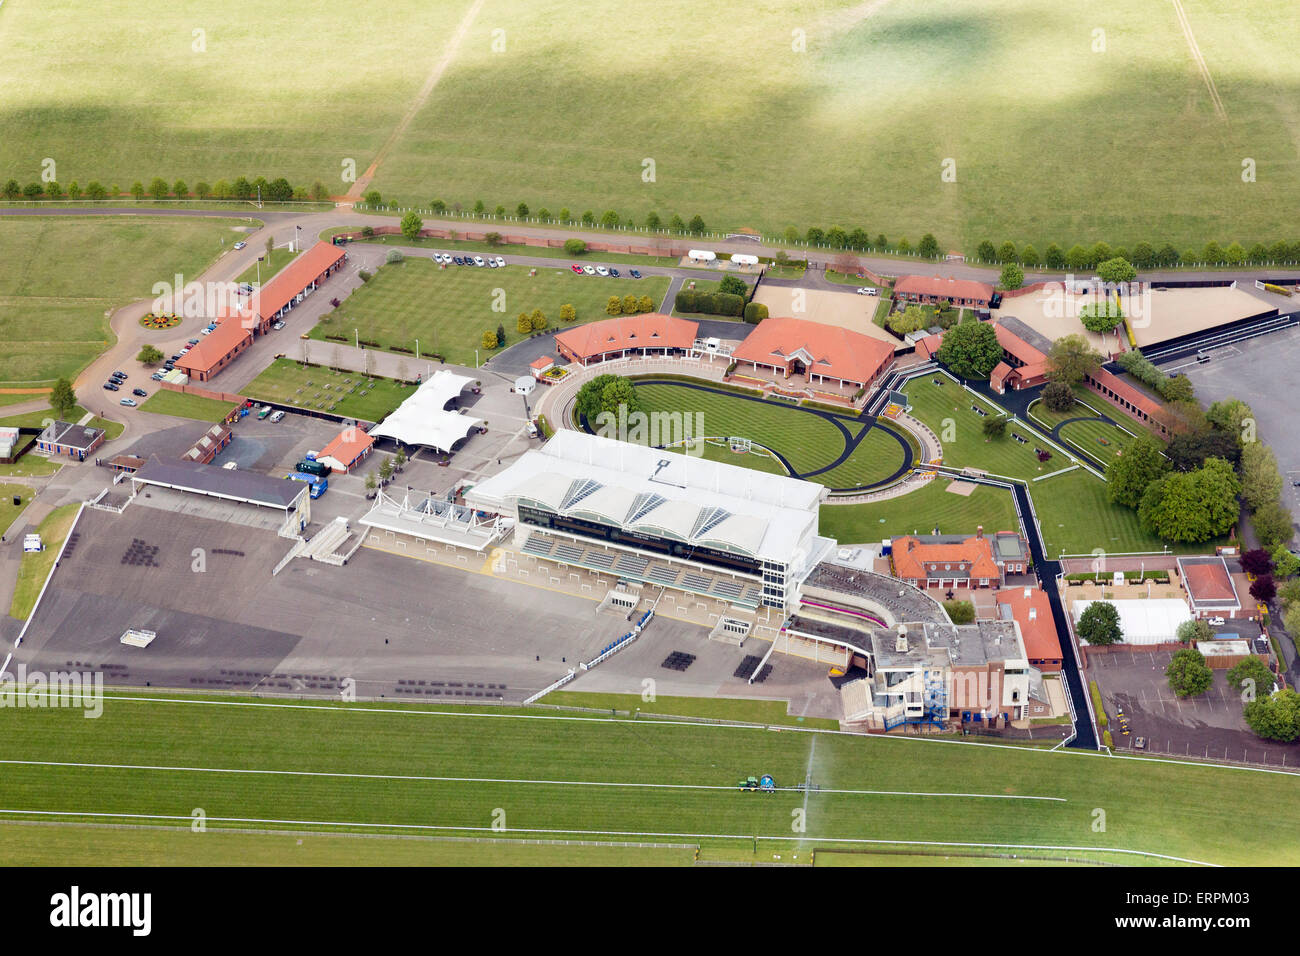 The Rowley Mile Racecourse and Millennium Grandstand in Newmarket, UK Stock Photo